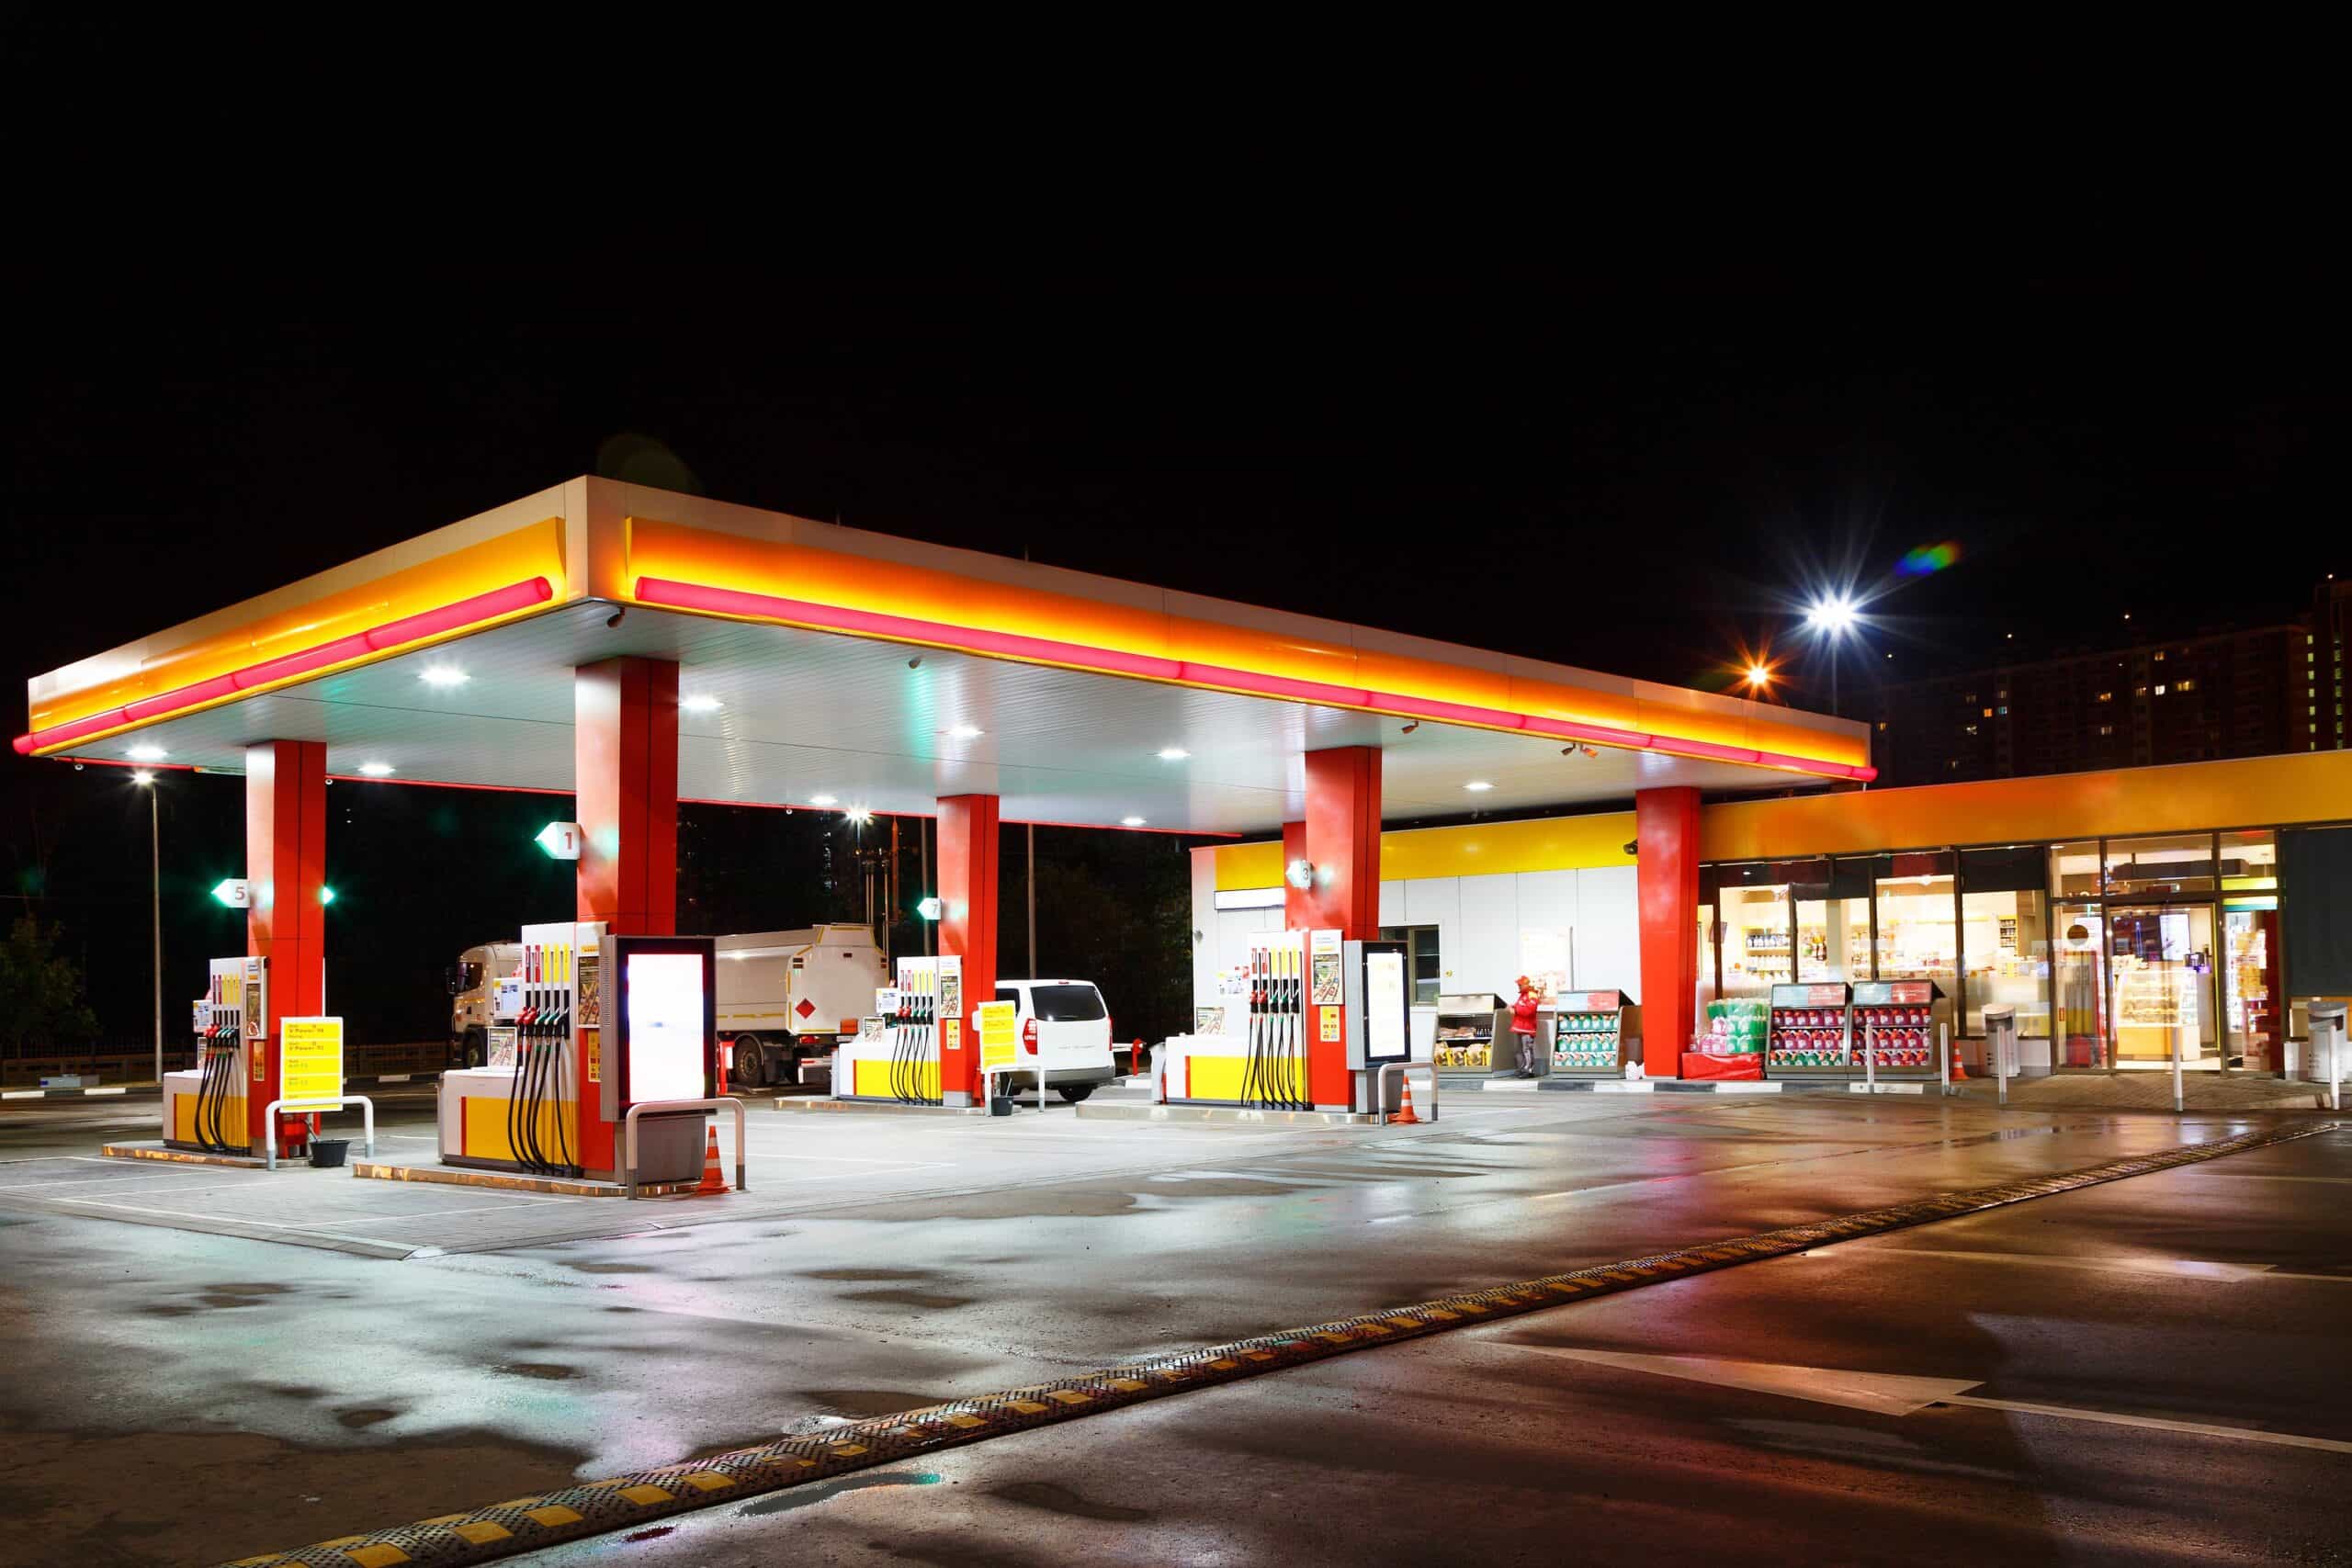 Petrol,Gas,Station,Station,At,Night,With,Lights,On,And